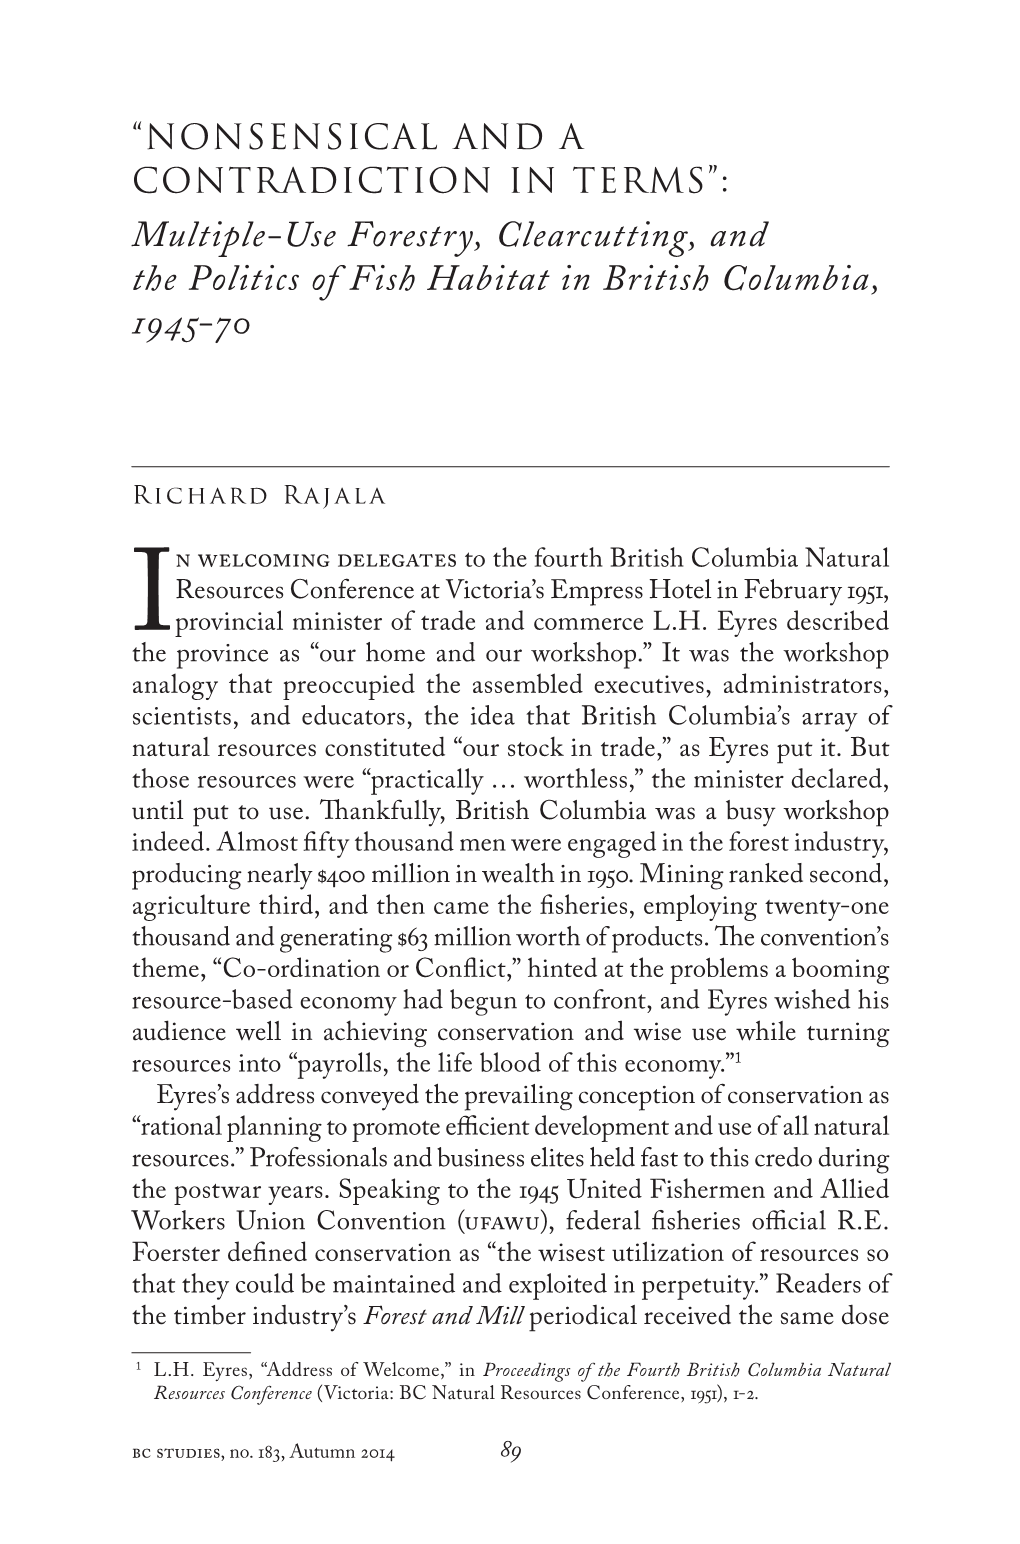 Multiple-Use Forestry, Clearcutting, and the Politics of Fish Habitat in British Columbia, 1945-70